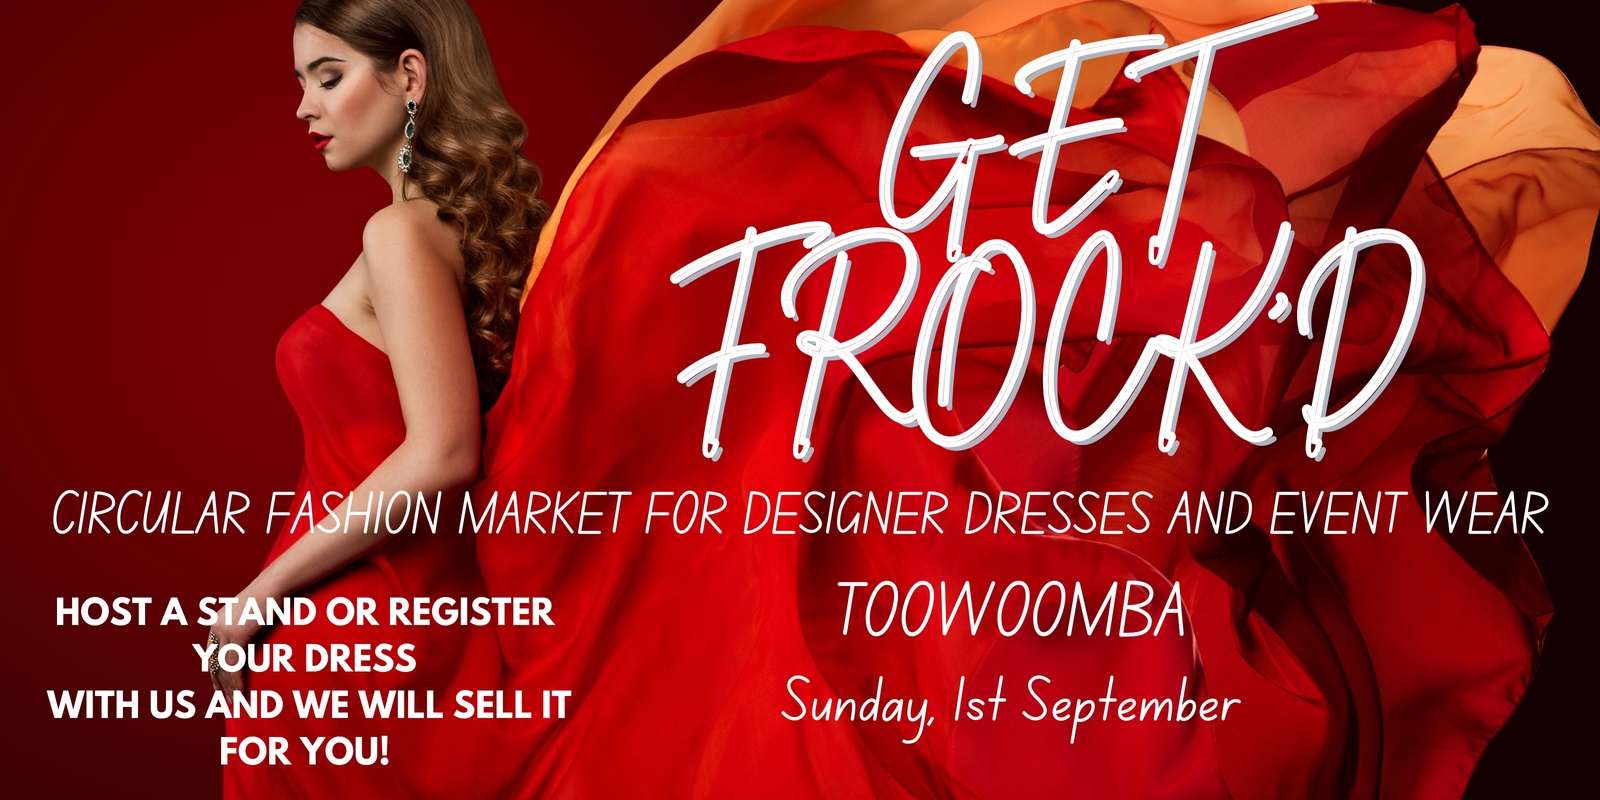 Banner image for Frock'd Toowoomba